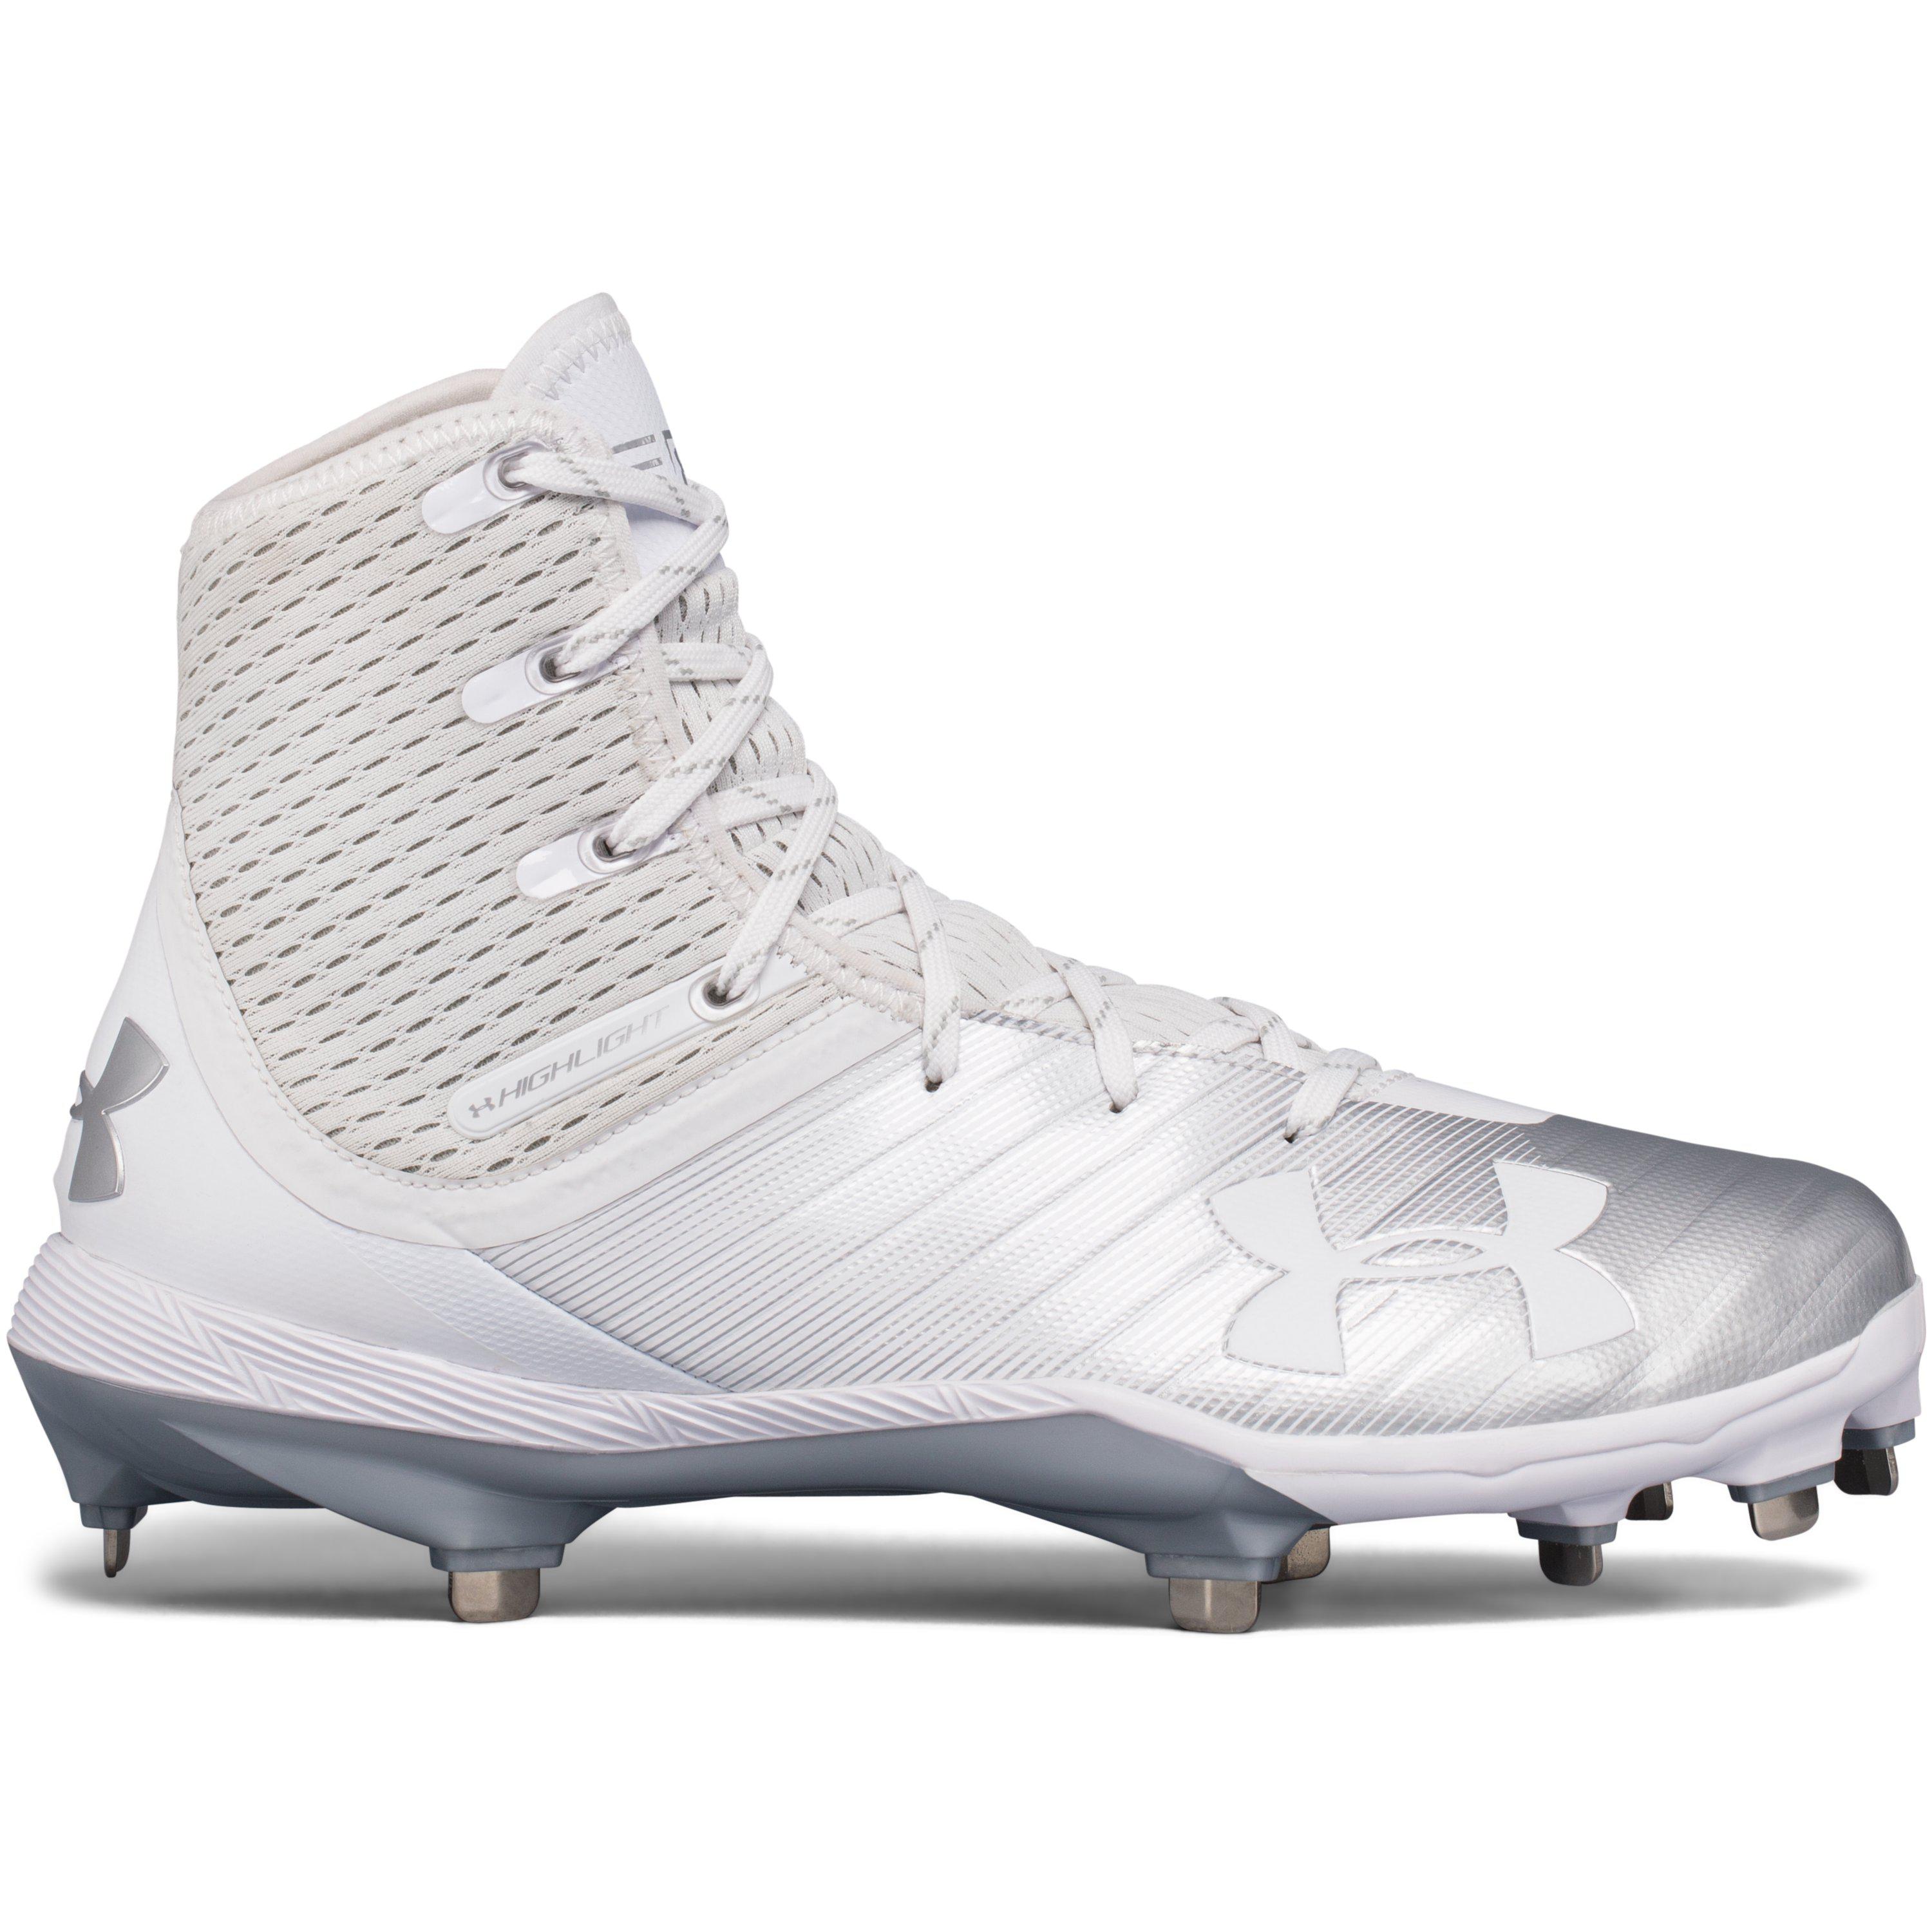 NEW Under Armour Yard Low TPU The Doughboys WWI Men's 14 Cleats 